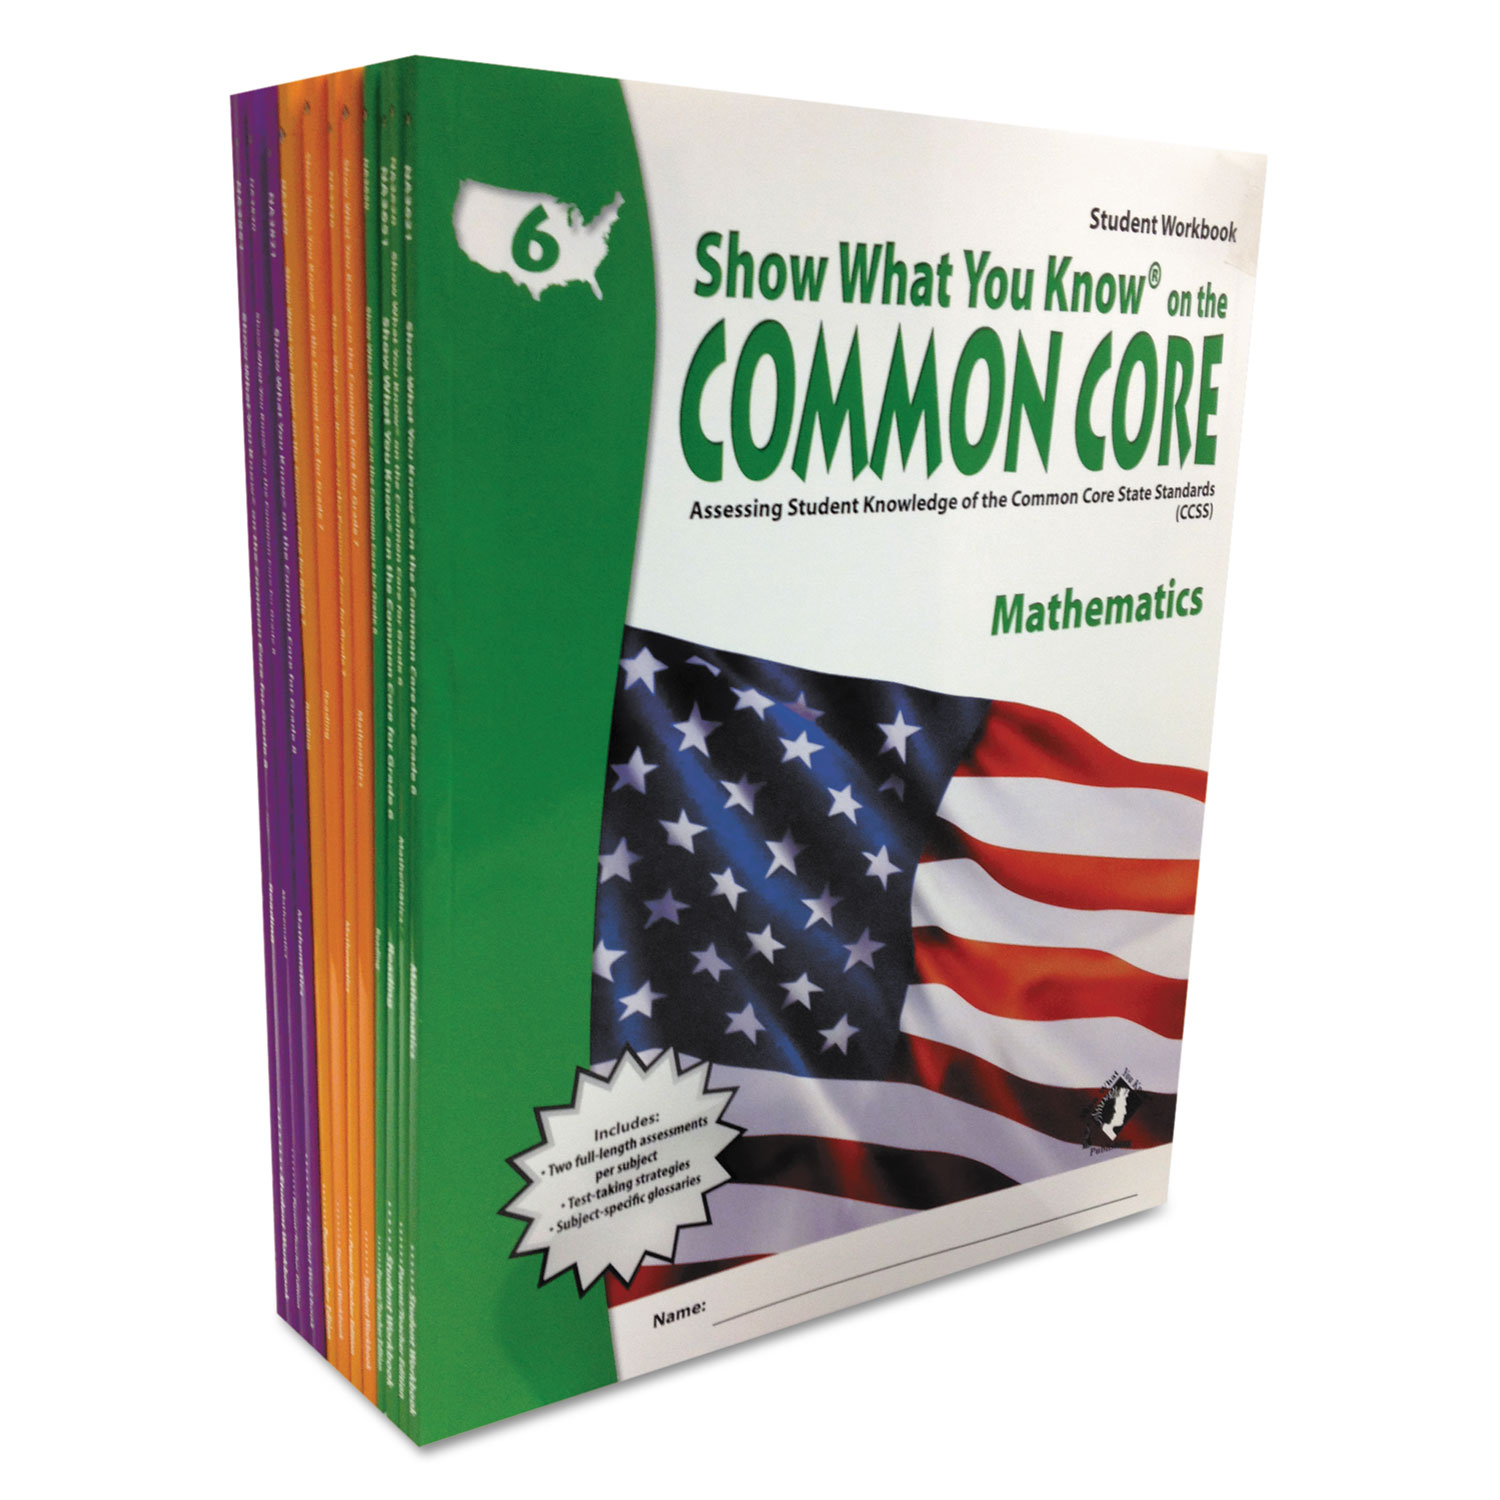 Common Core Assessment Reference Kit, Math/Reading, Grades 6-8, 1136 Pages